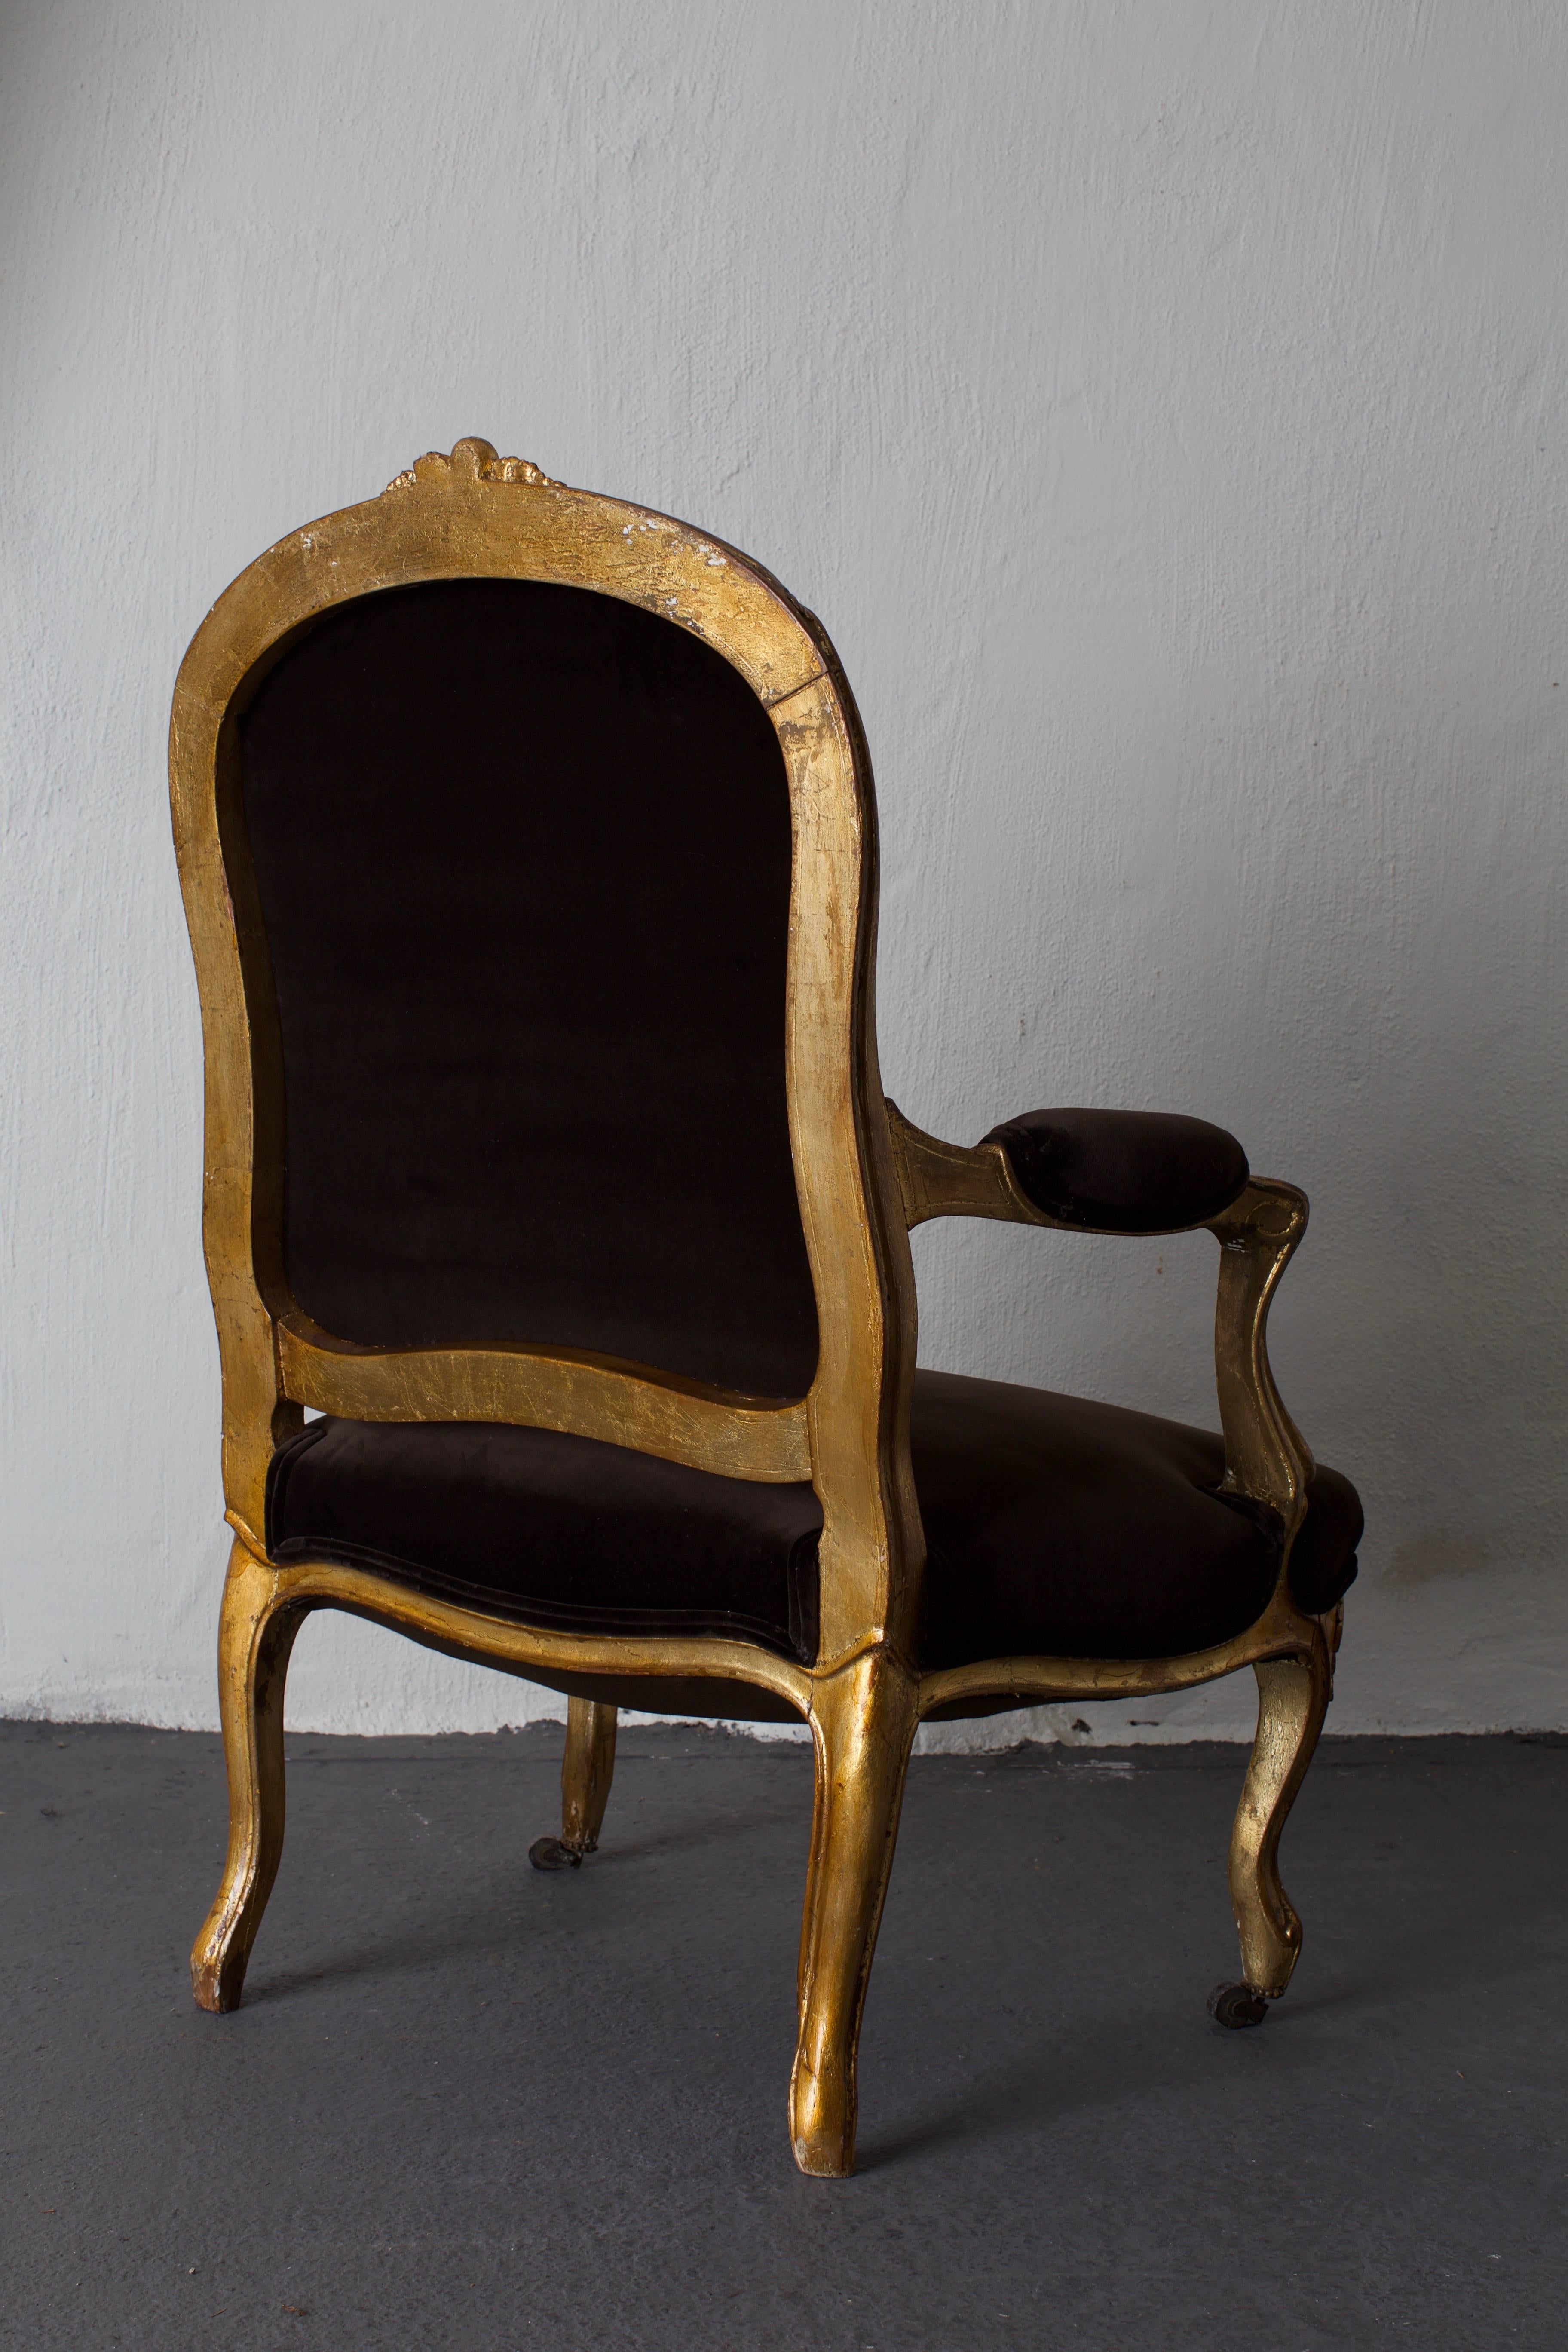 Armchair French giltwood Rococo style France. An armchair made during the 19th century in France. Frame of giltwood with beautiful carvings. Contemporary upholstery in dark brown cotton velvet with double piping.